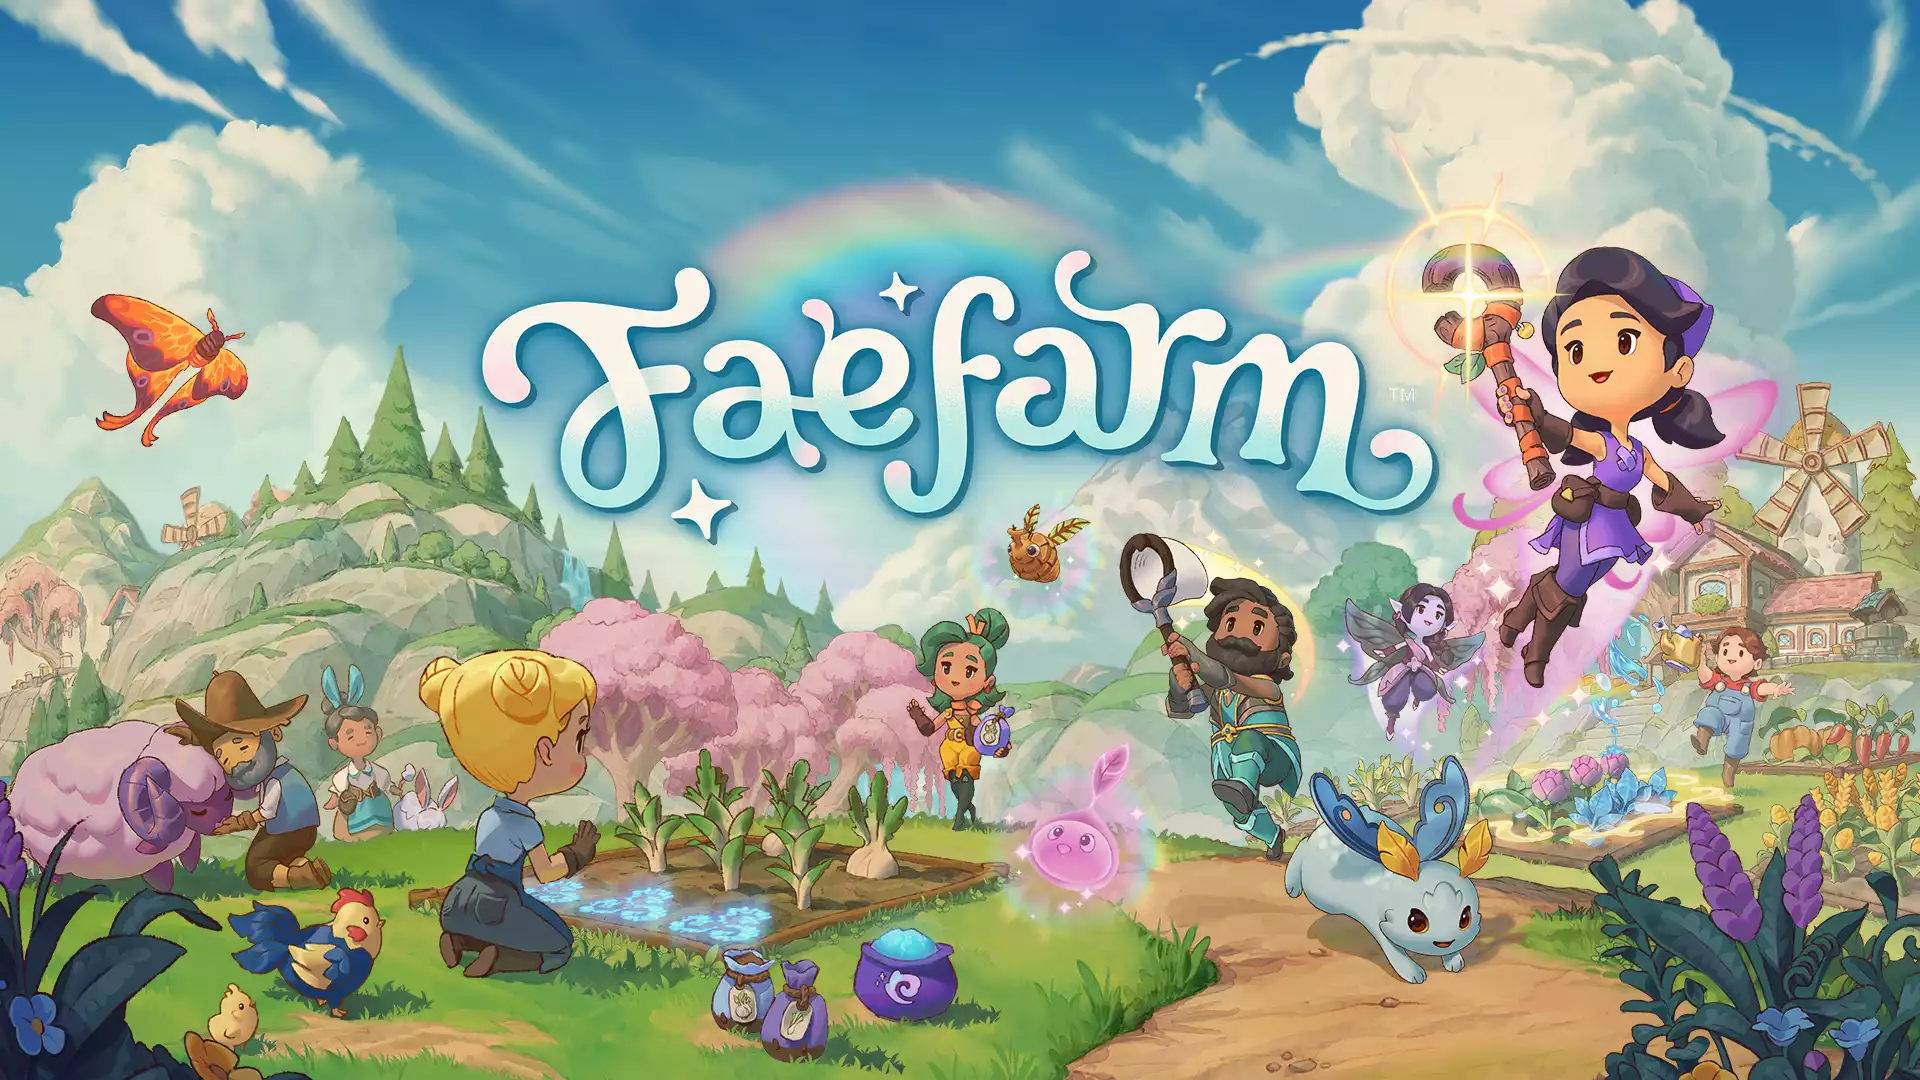 Fae Farm has gone down in price weeks before release